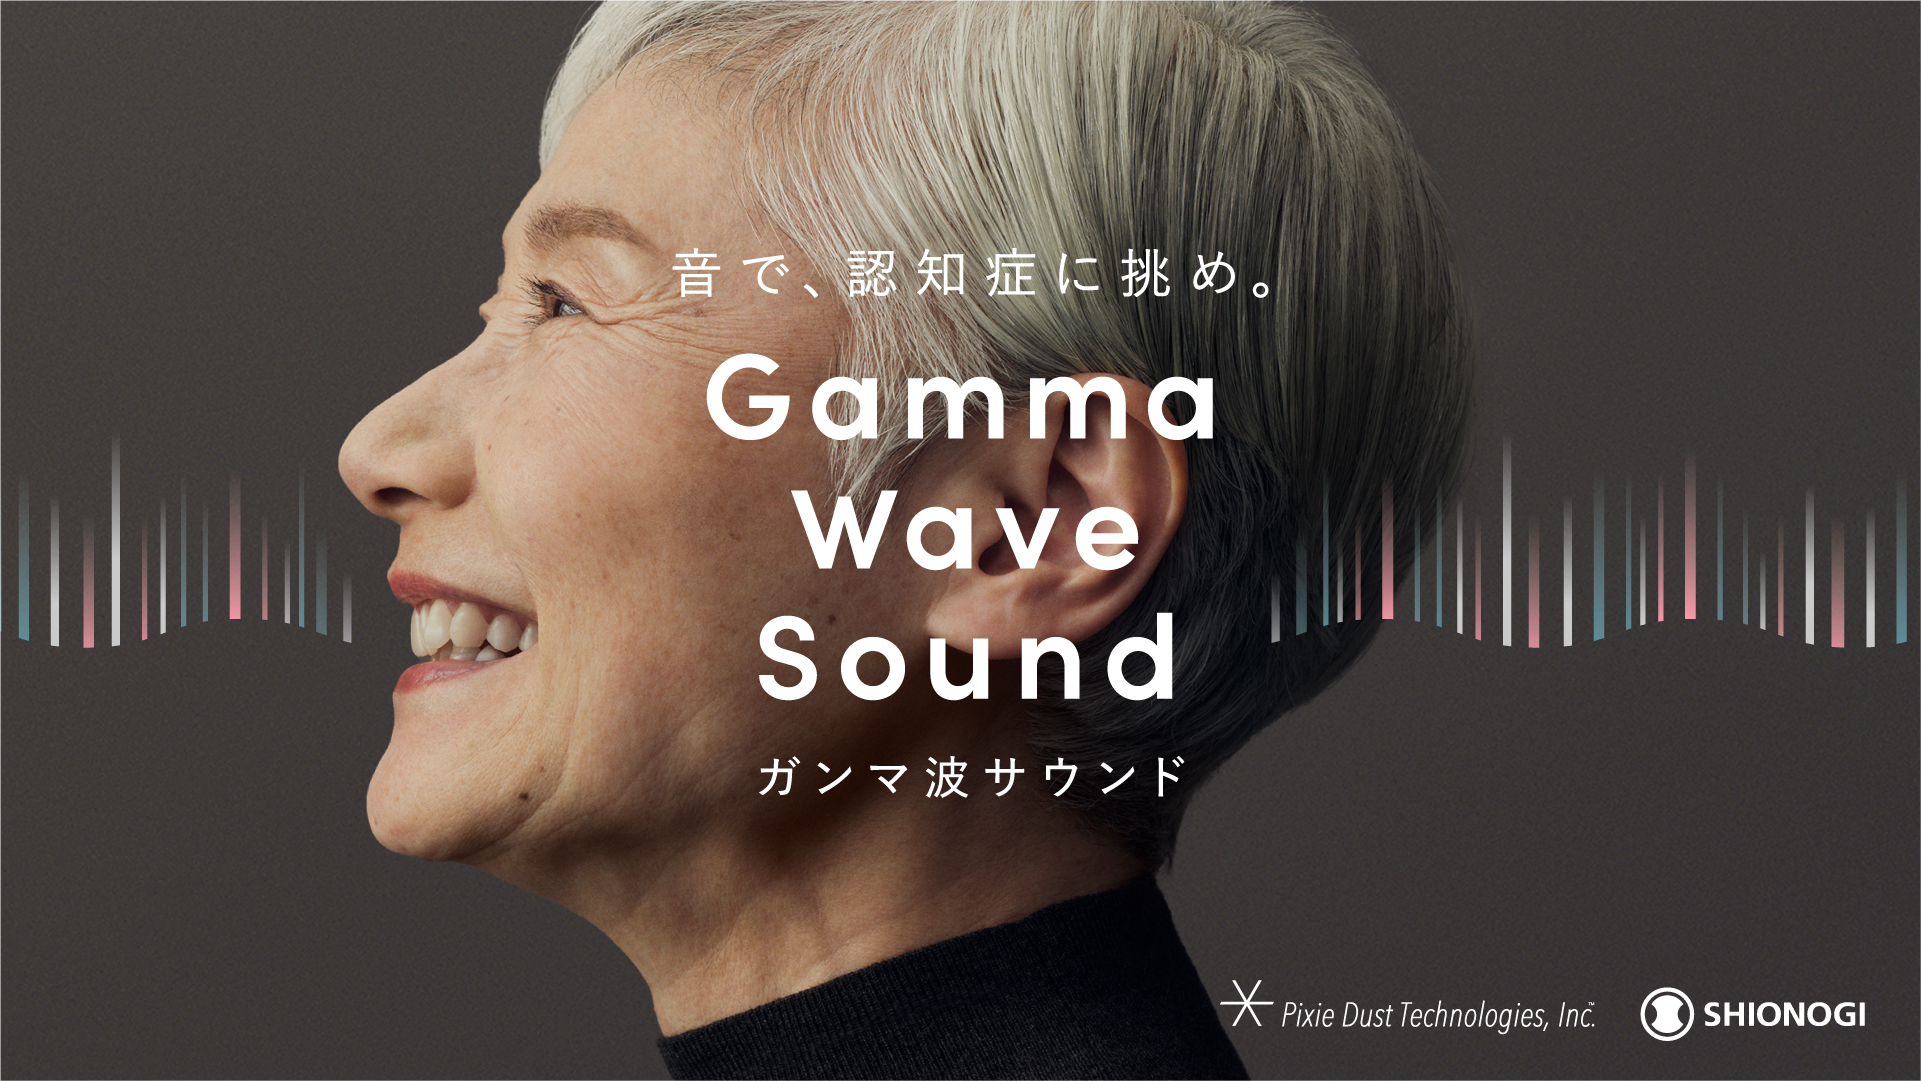 Expansion of “Gamma Wave Sound” Initiatives by Pixie Dust Technologies, Inc., Shionogi & Co., Ltd. and Shionogi Healthcare Co., Ltd. to Challenge Dementia with Sound – Toward a Society Where You Can Experience Cognitive Function Care through Sound in Many Places, Including Commercial Facilities and Audio Media